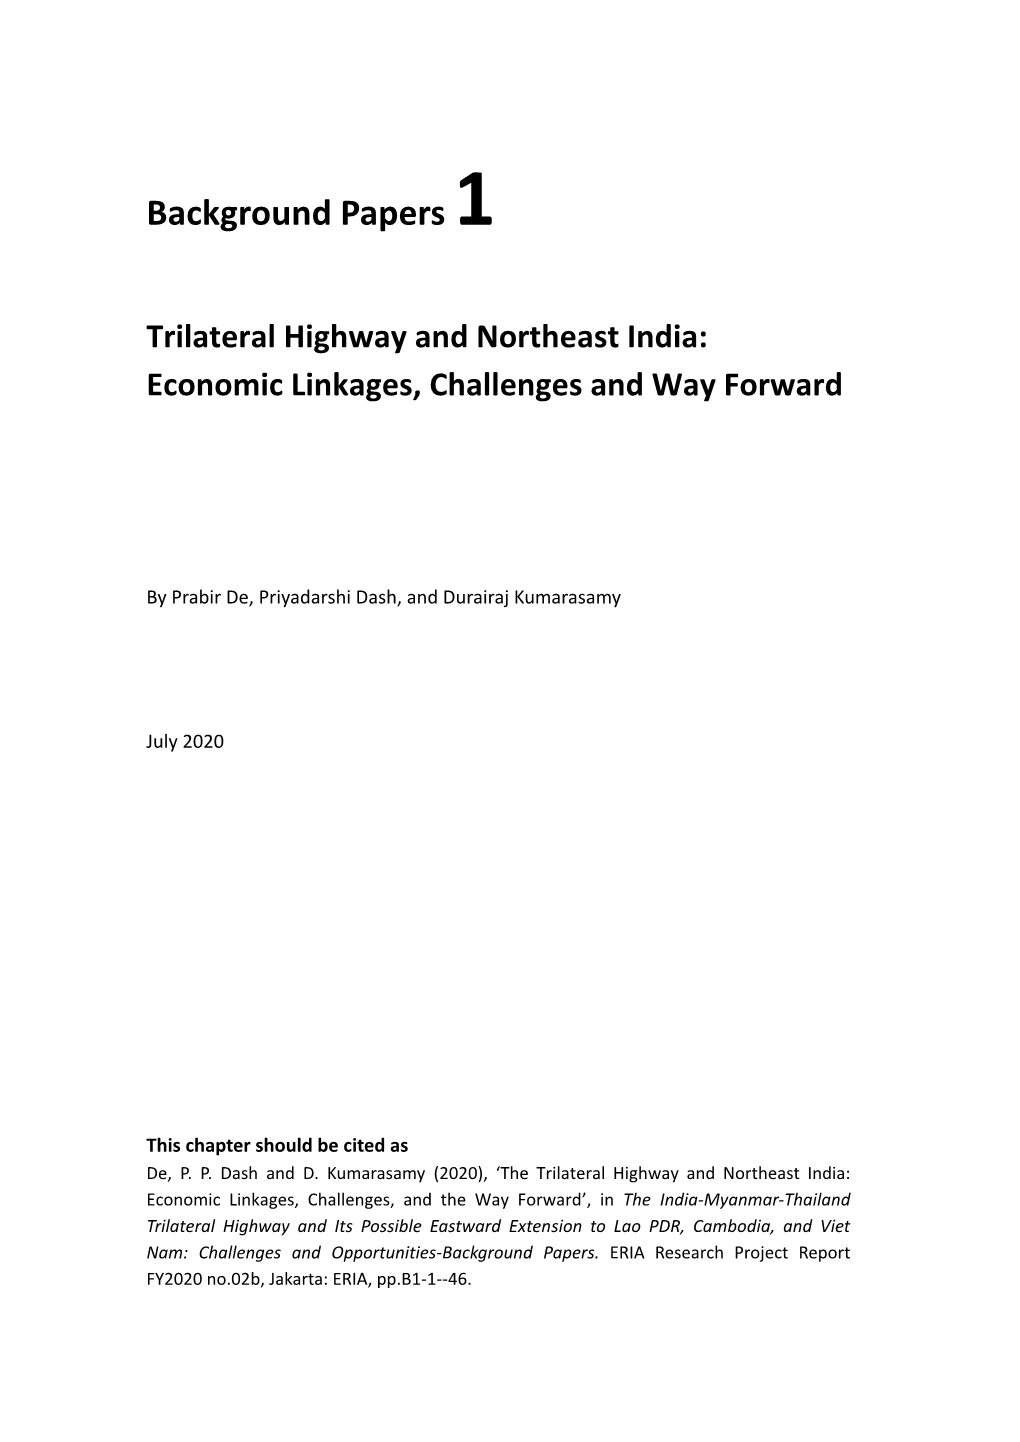 Trilateral Highway and Northeast India: Economic Linkages, Challenges and Way Forward